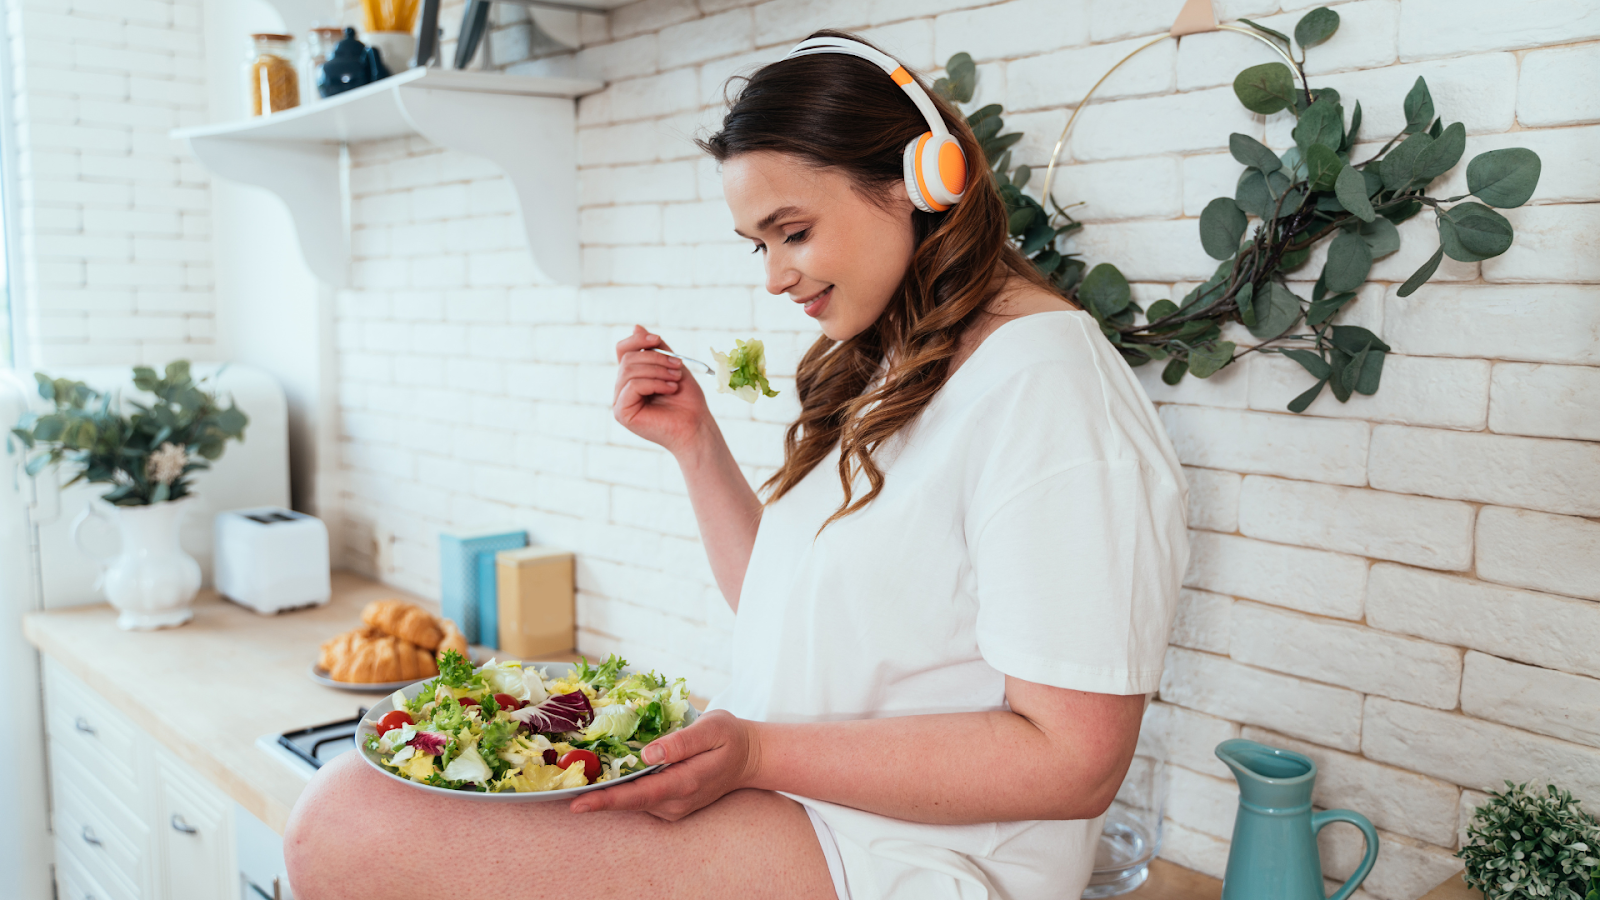 A woman sitting on a counter with headphones on eating healthy meal.